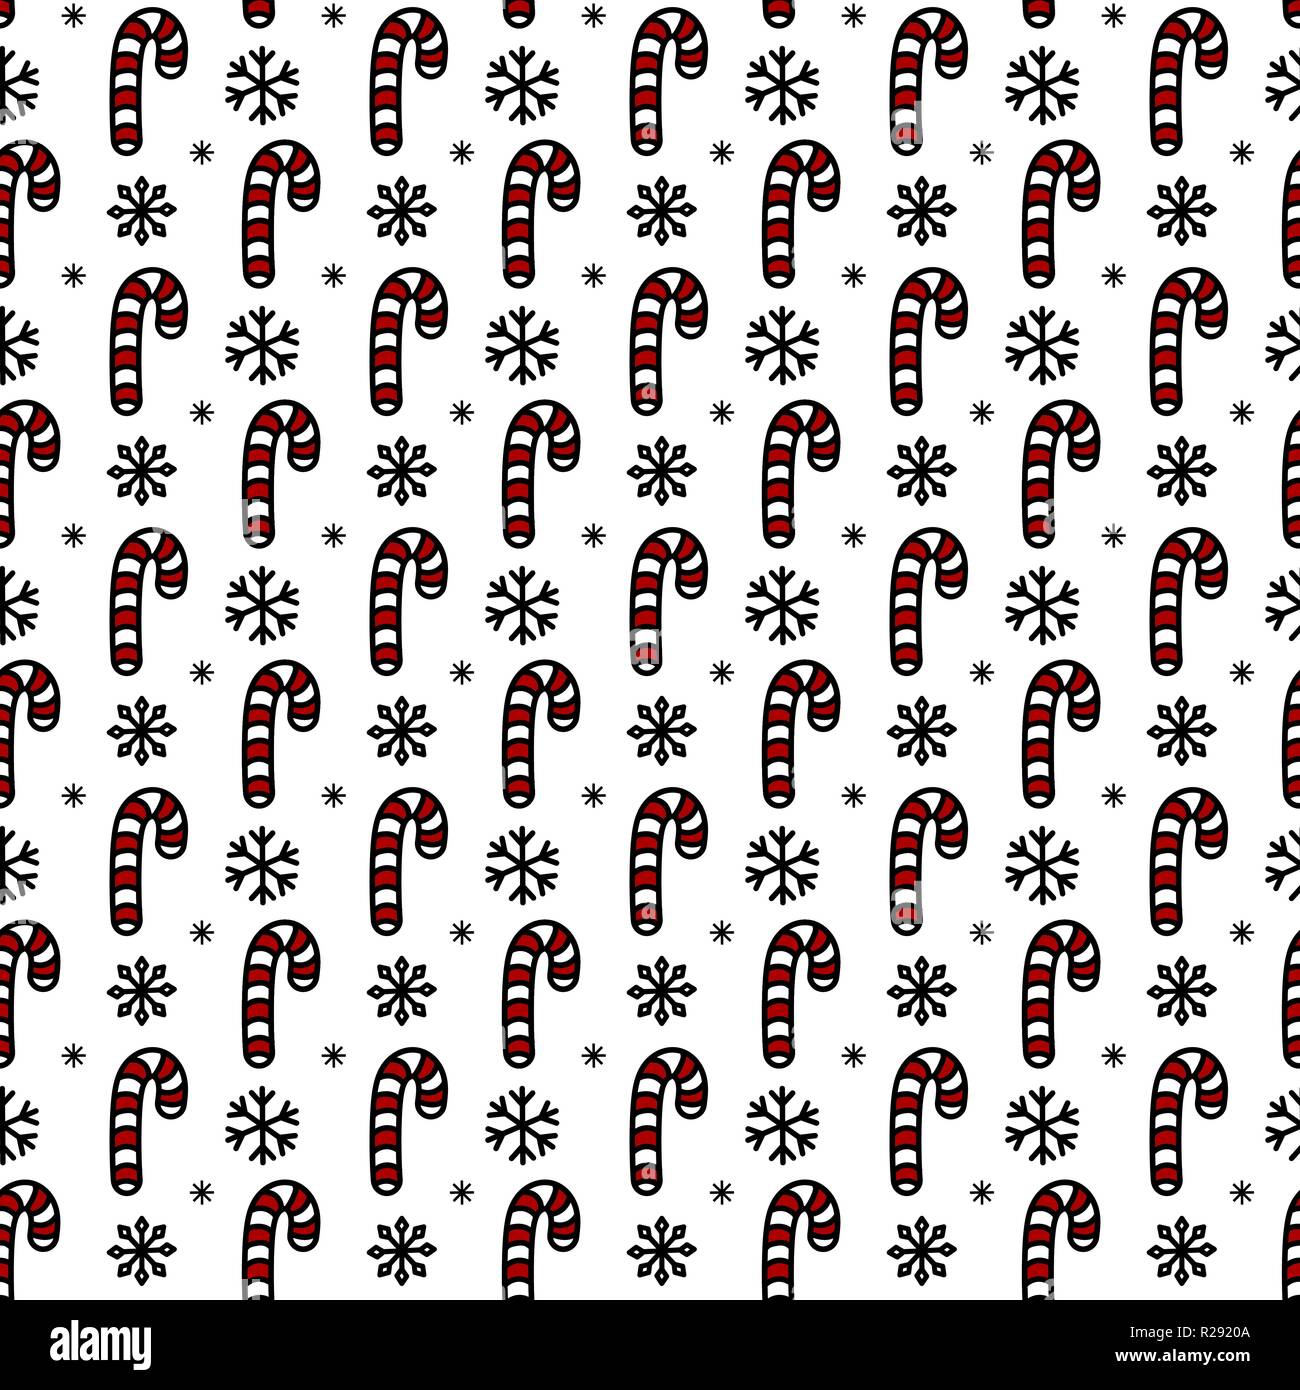 Christmas seamless pattern with candy canes. Hand drawn doodle style. Black and white vector illustration. Isolated on white background. Perfect for wrapping paper, wallpaper, fabric print Stock Vector